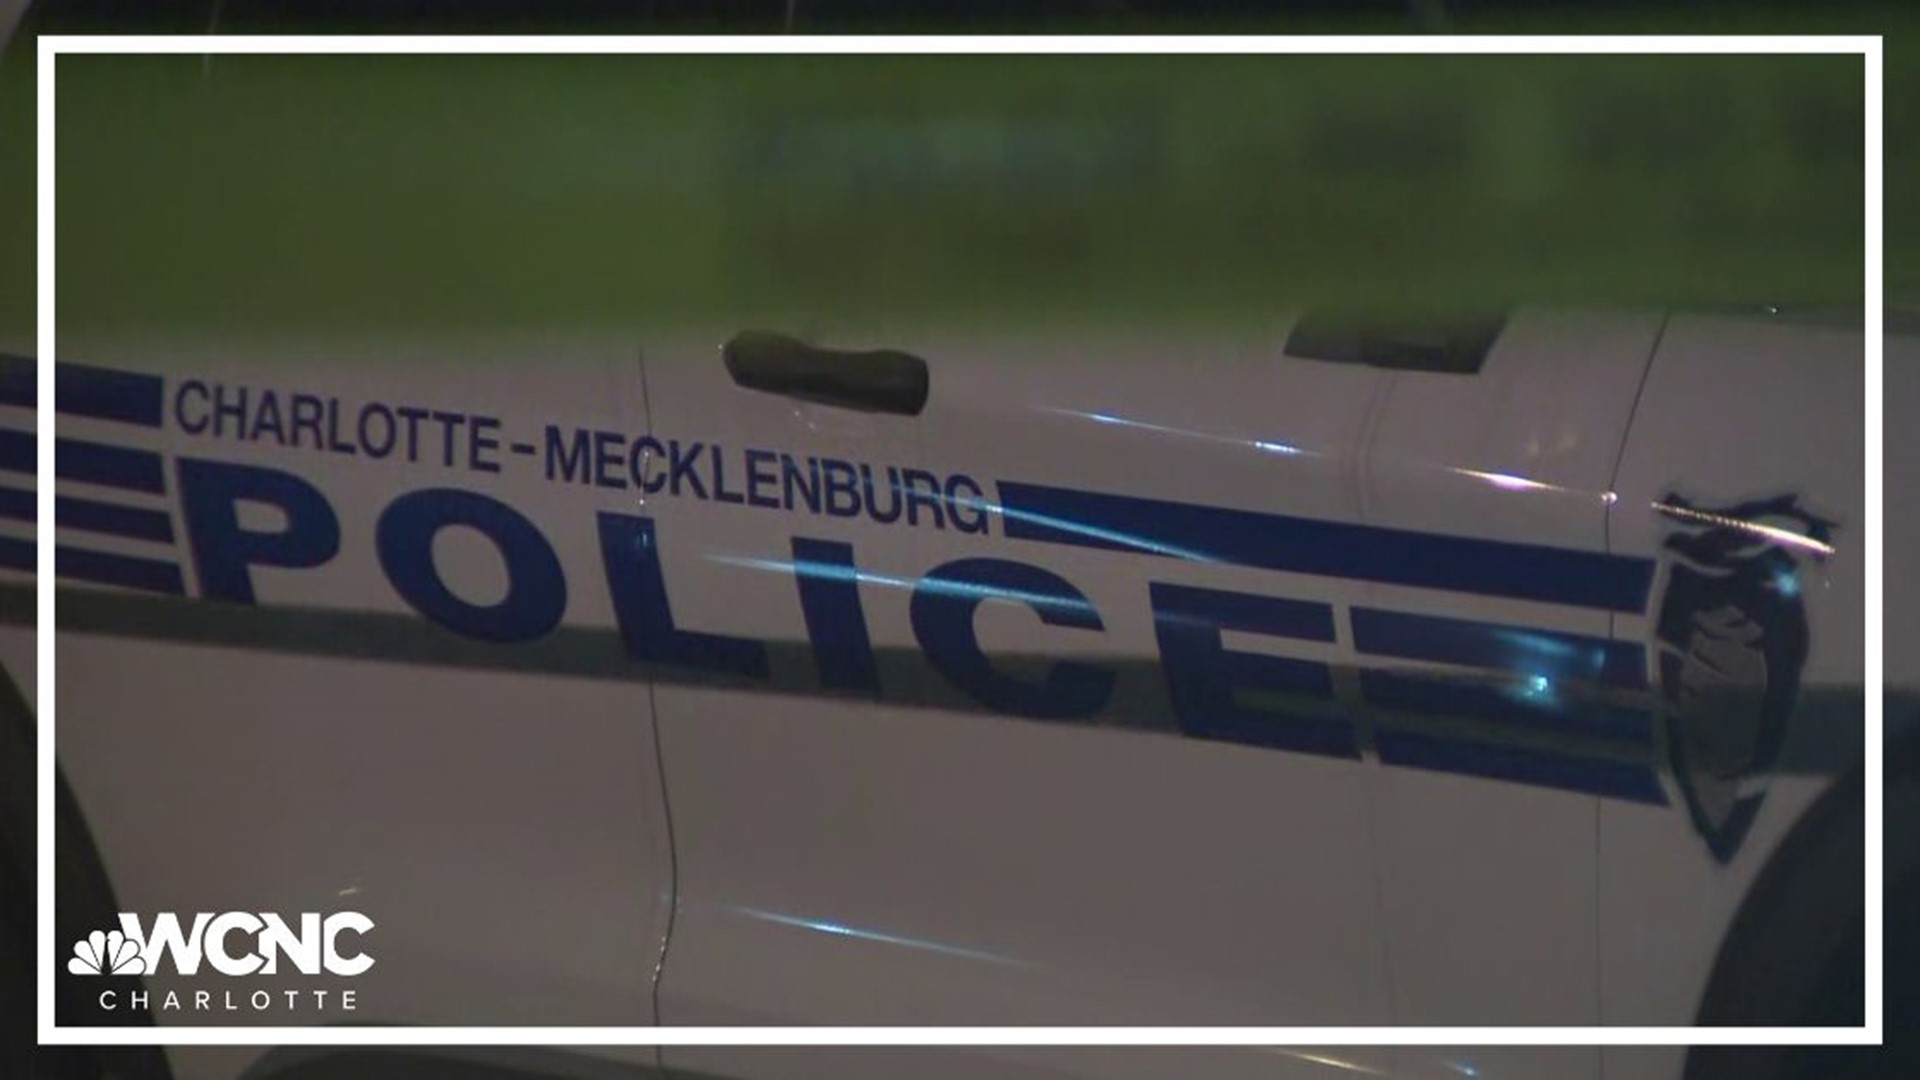 A 17-year-old was charged with murder in connection with the shooting of a 21-year-old man in southwest Charlotte last month, Charlotte-Mecklenburg Police said.